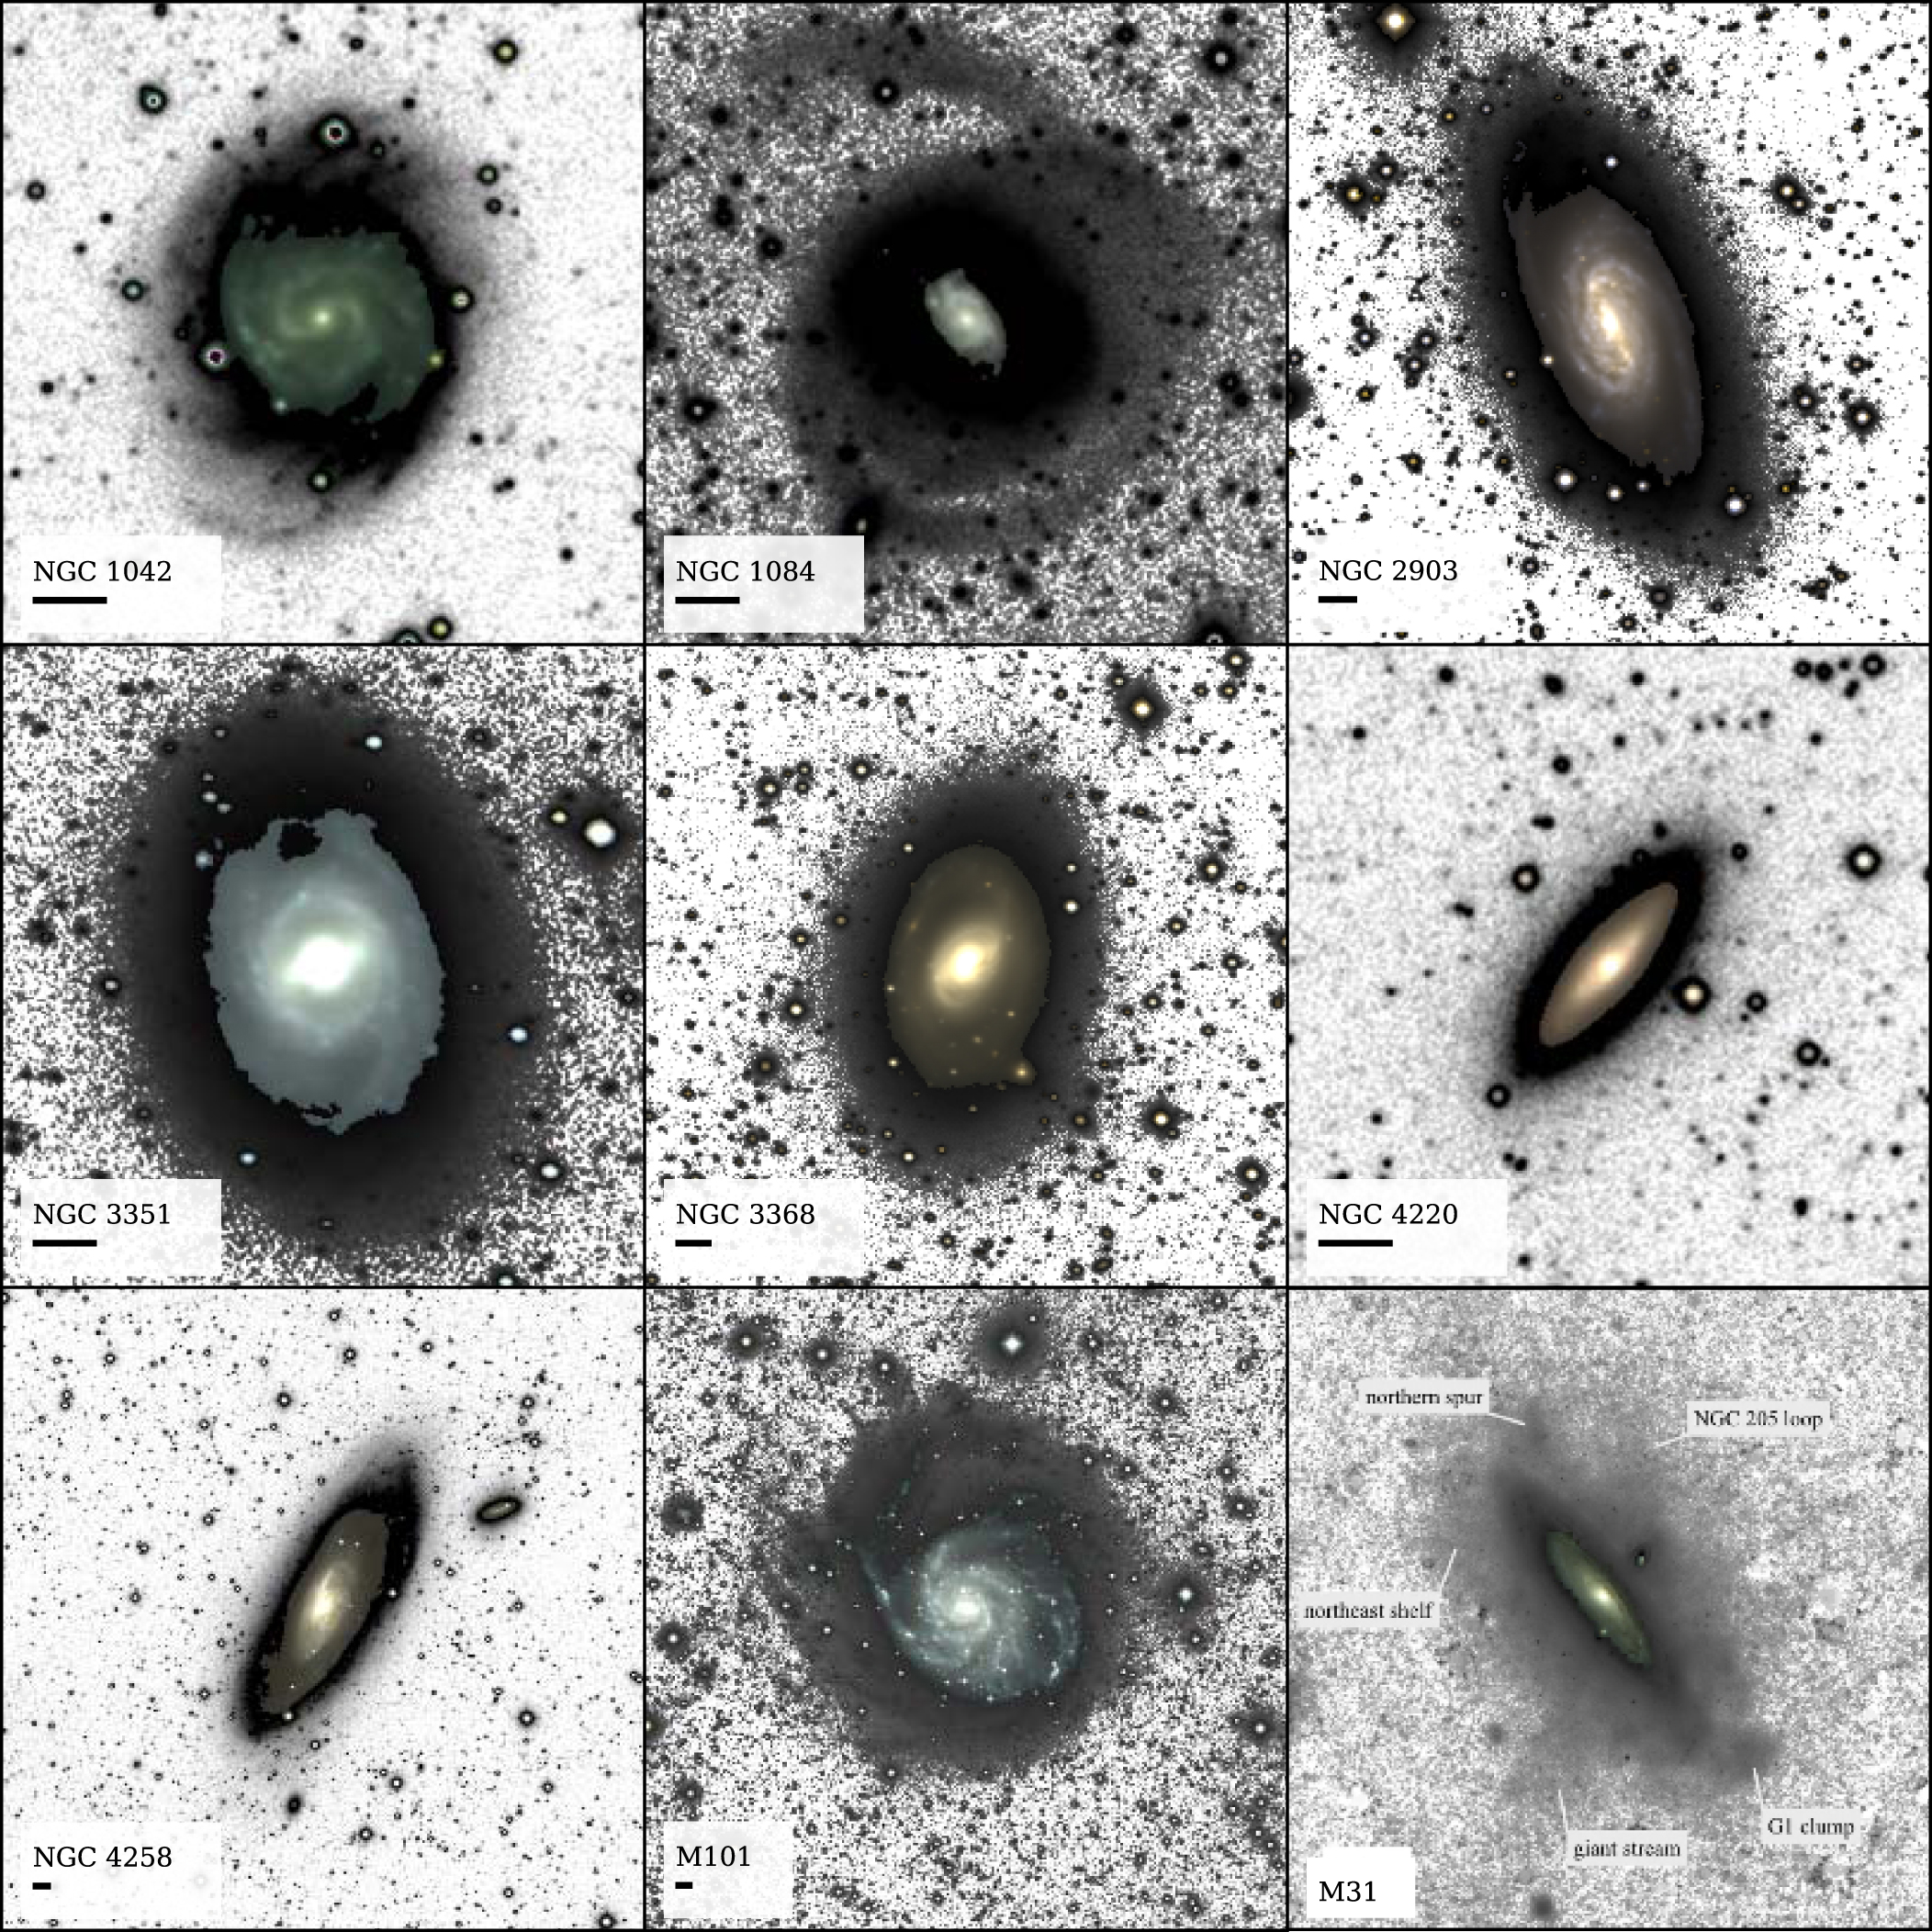 Figure 1 from Merritt et al. (2016): low surface-brightness features around galaxies